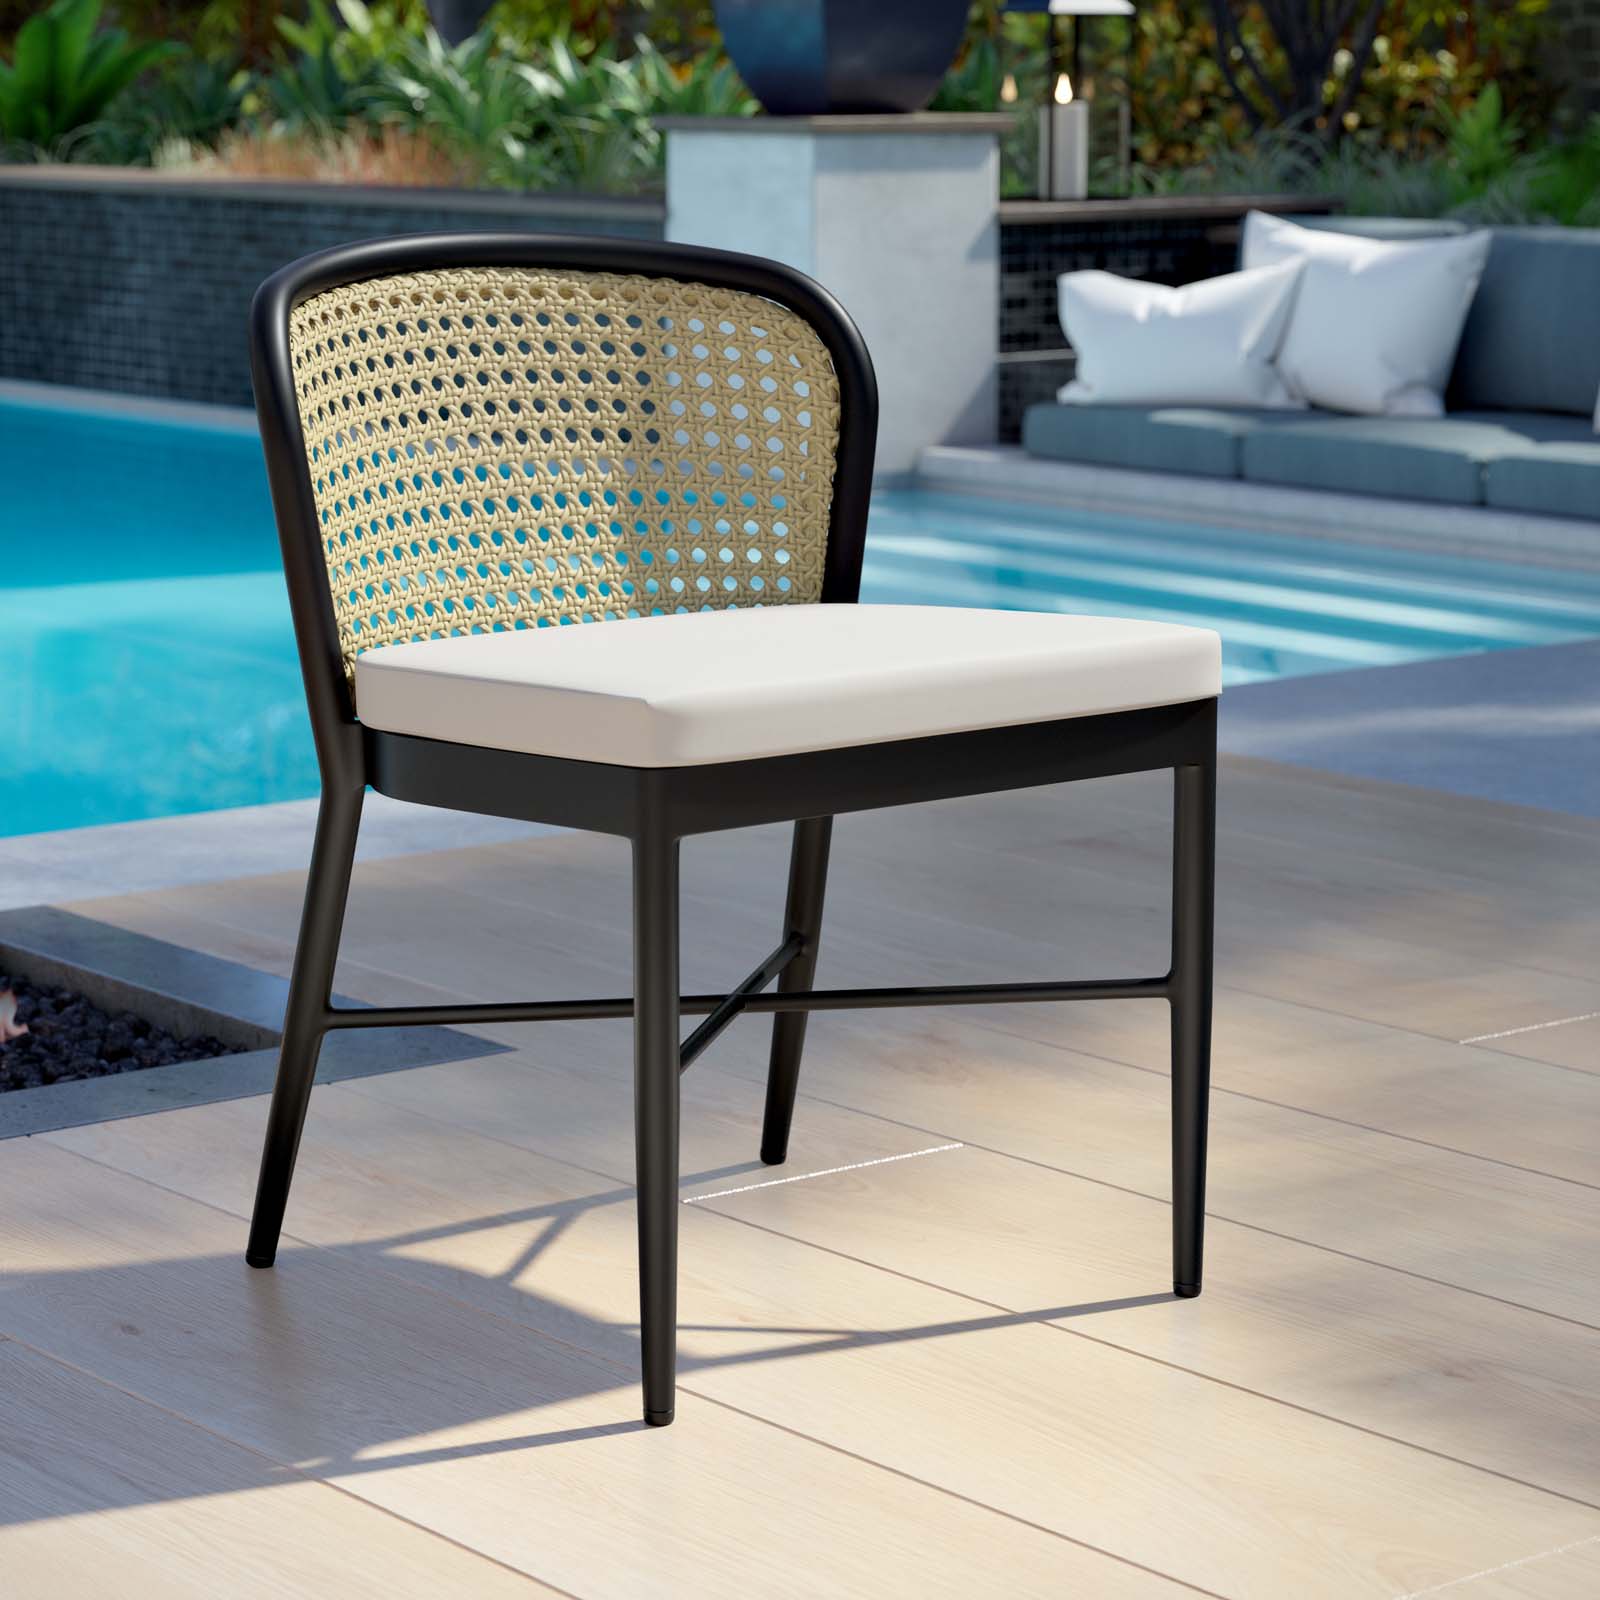 Melbourne Outdoor Patio Dining Side Chair - East Shore Modern Home Furnishings